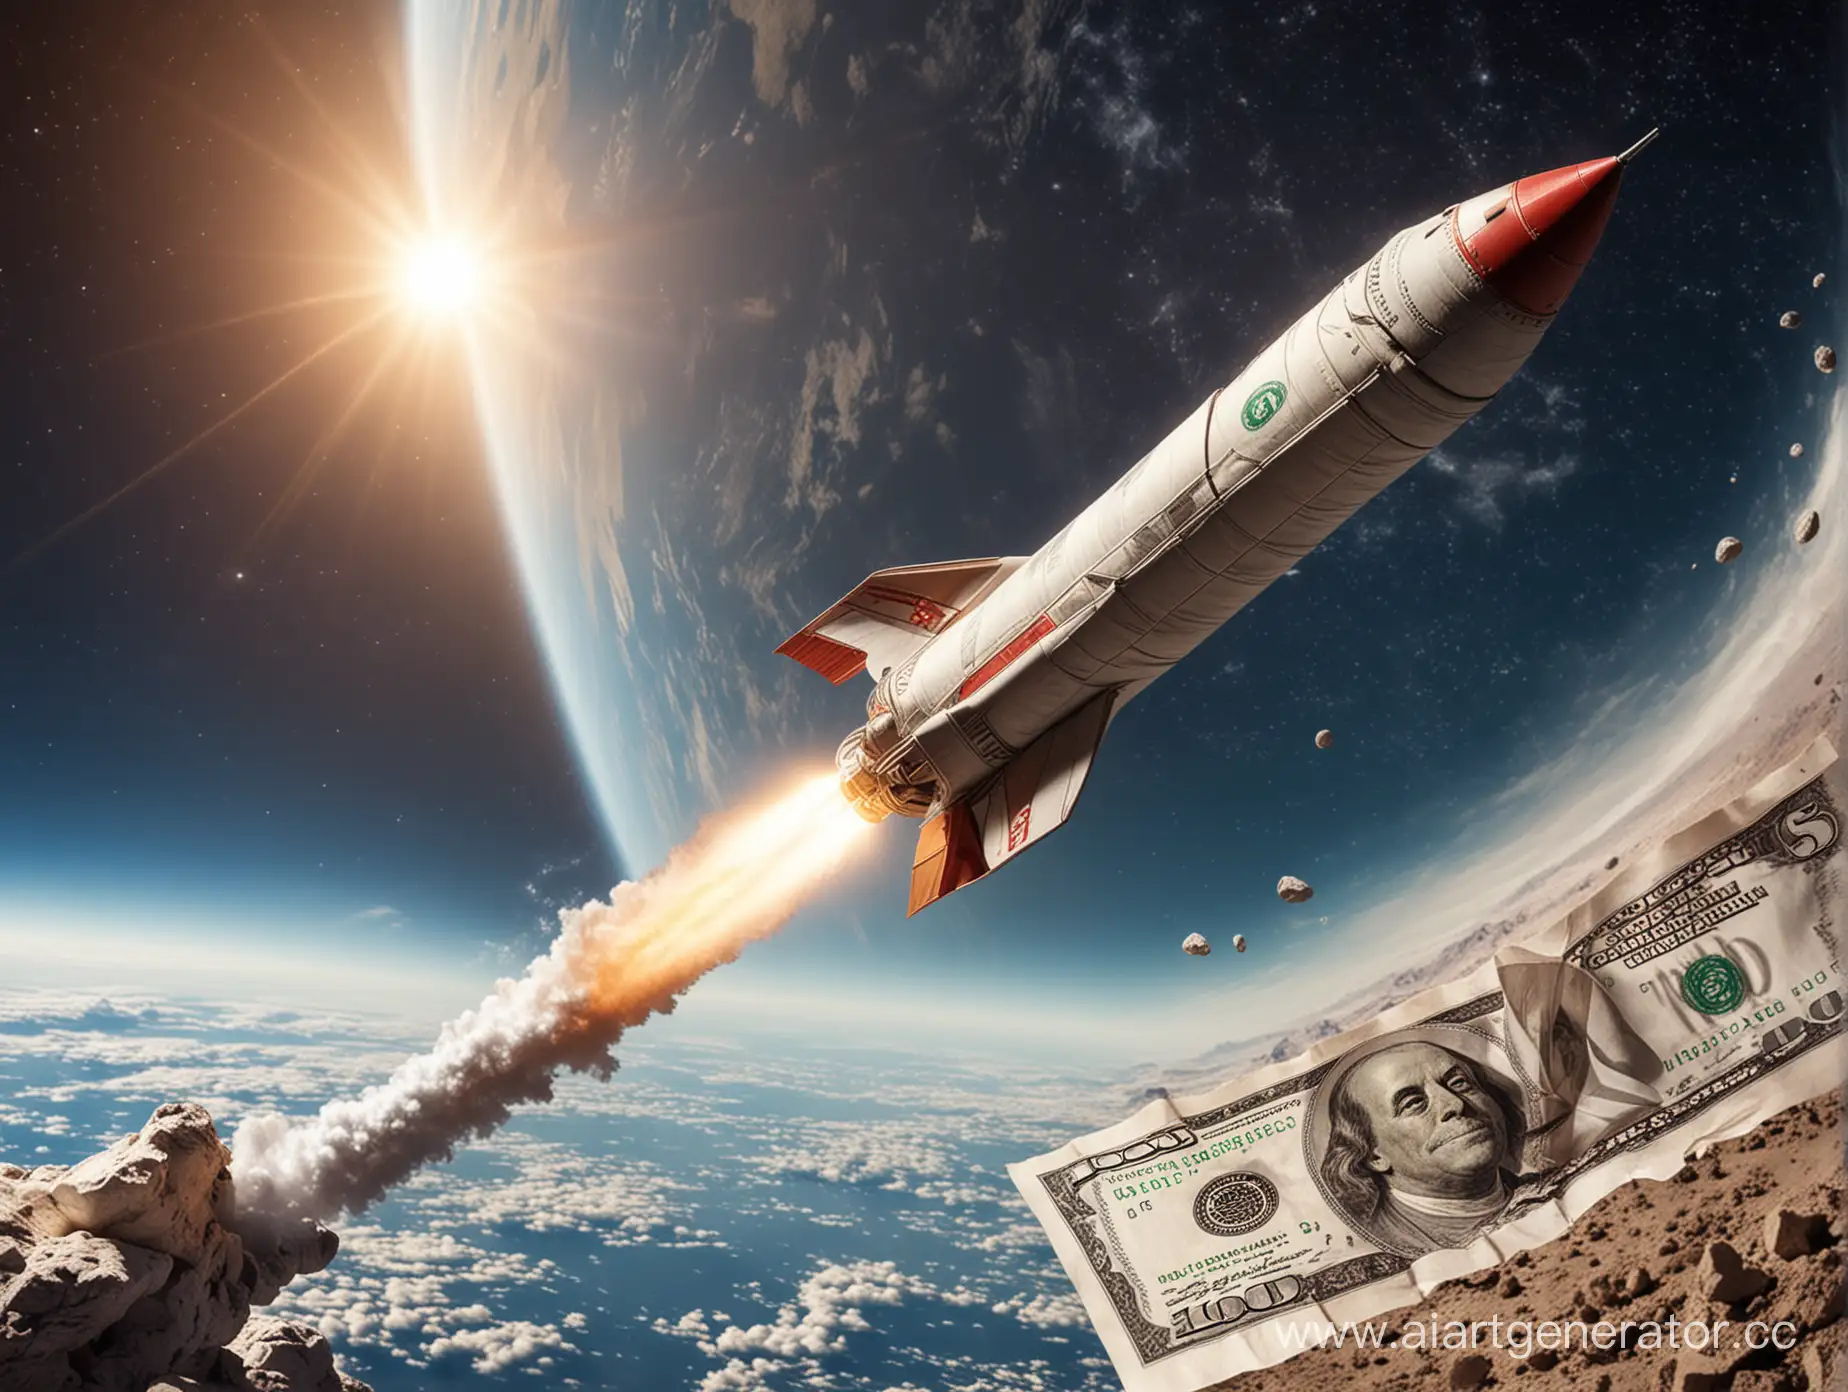 The rocket flies between dollars, against the background of the planet